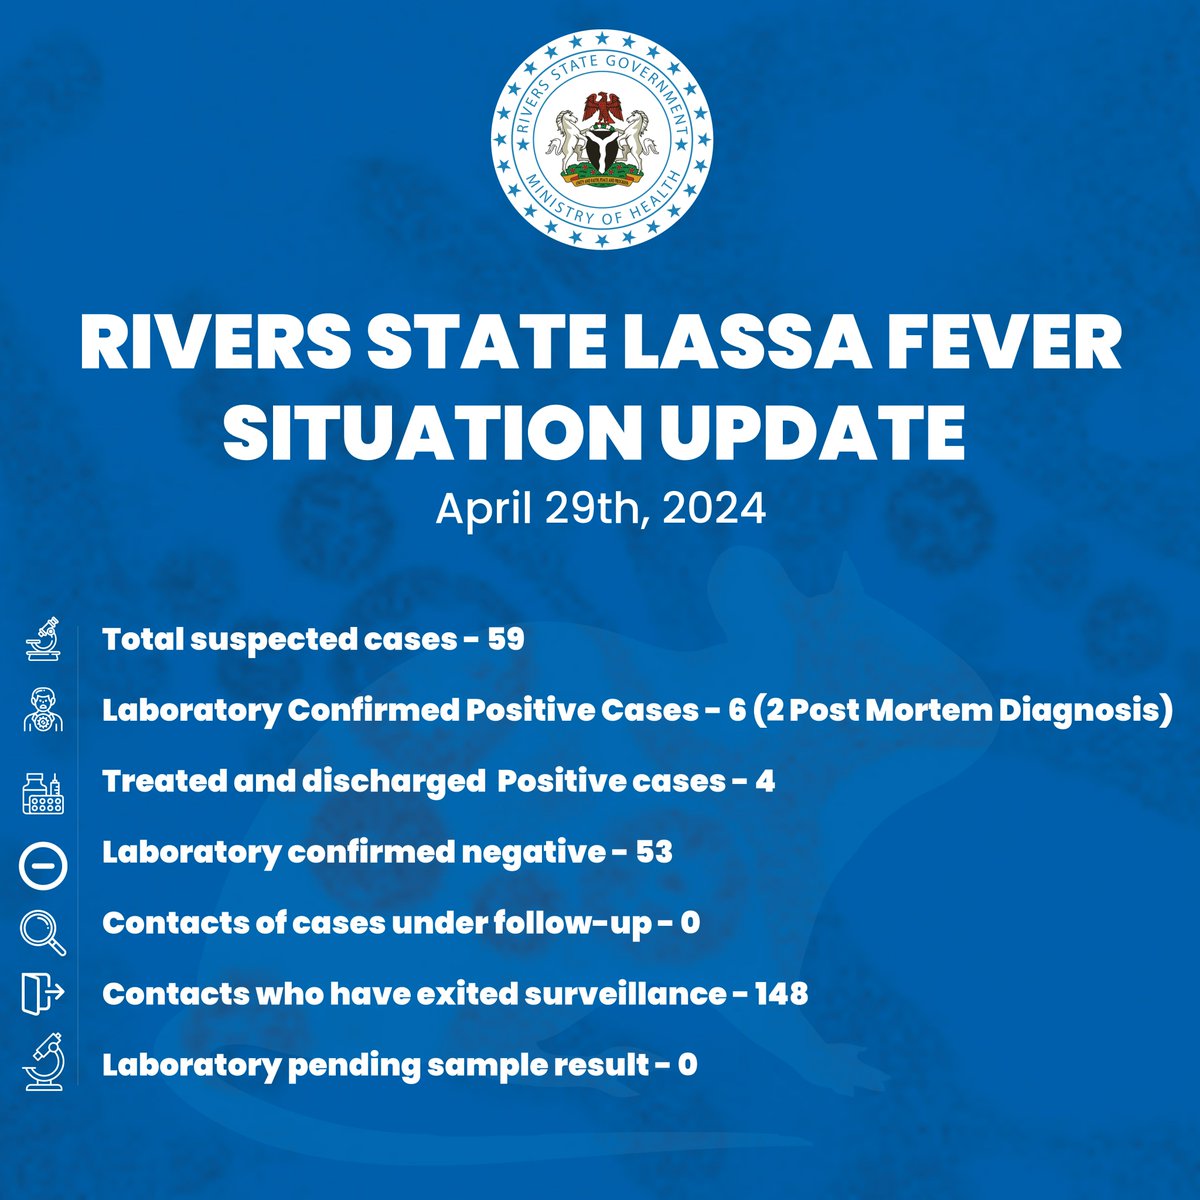 #LassaFever Situation Update in Rivers State (29/04/2024) 

Total Suspected Cases: 59
Laboratory Confirmed Positive Cases: 6 (2 Post mortem)
Treated and Discharged Positive Cases: 4
Laboratory Confirmed Negative Cases: 53
Contacts of Cases under Follow-up: 0 
Contacts who have…